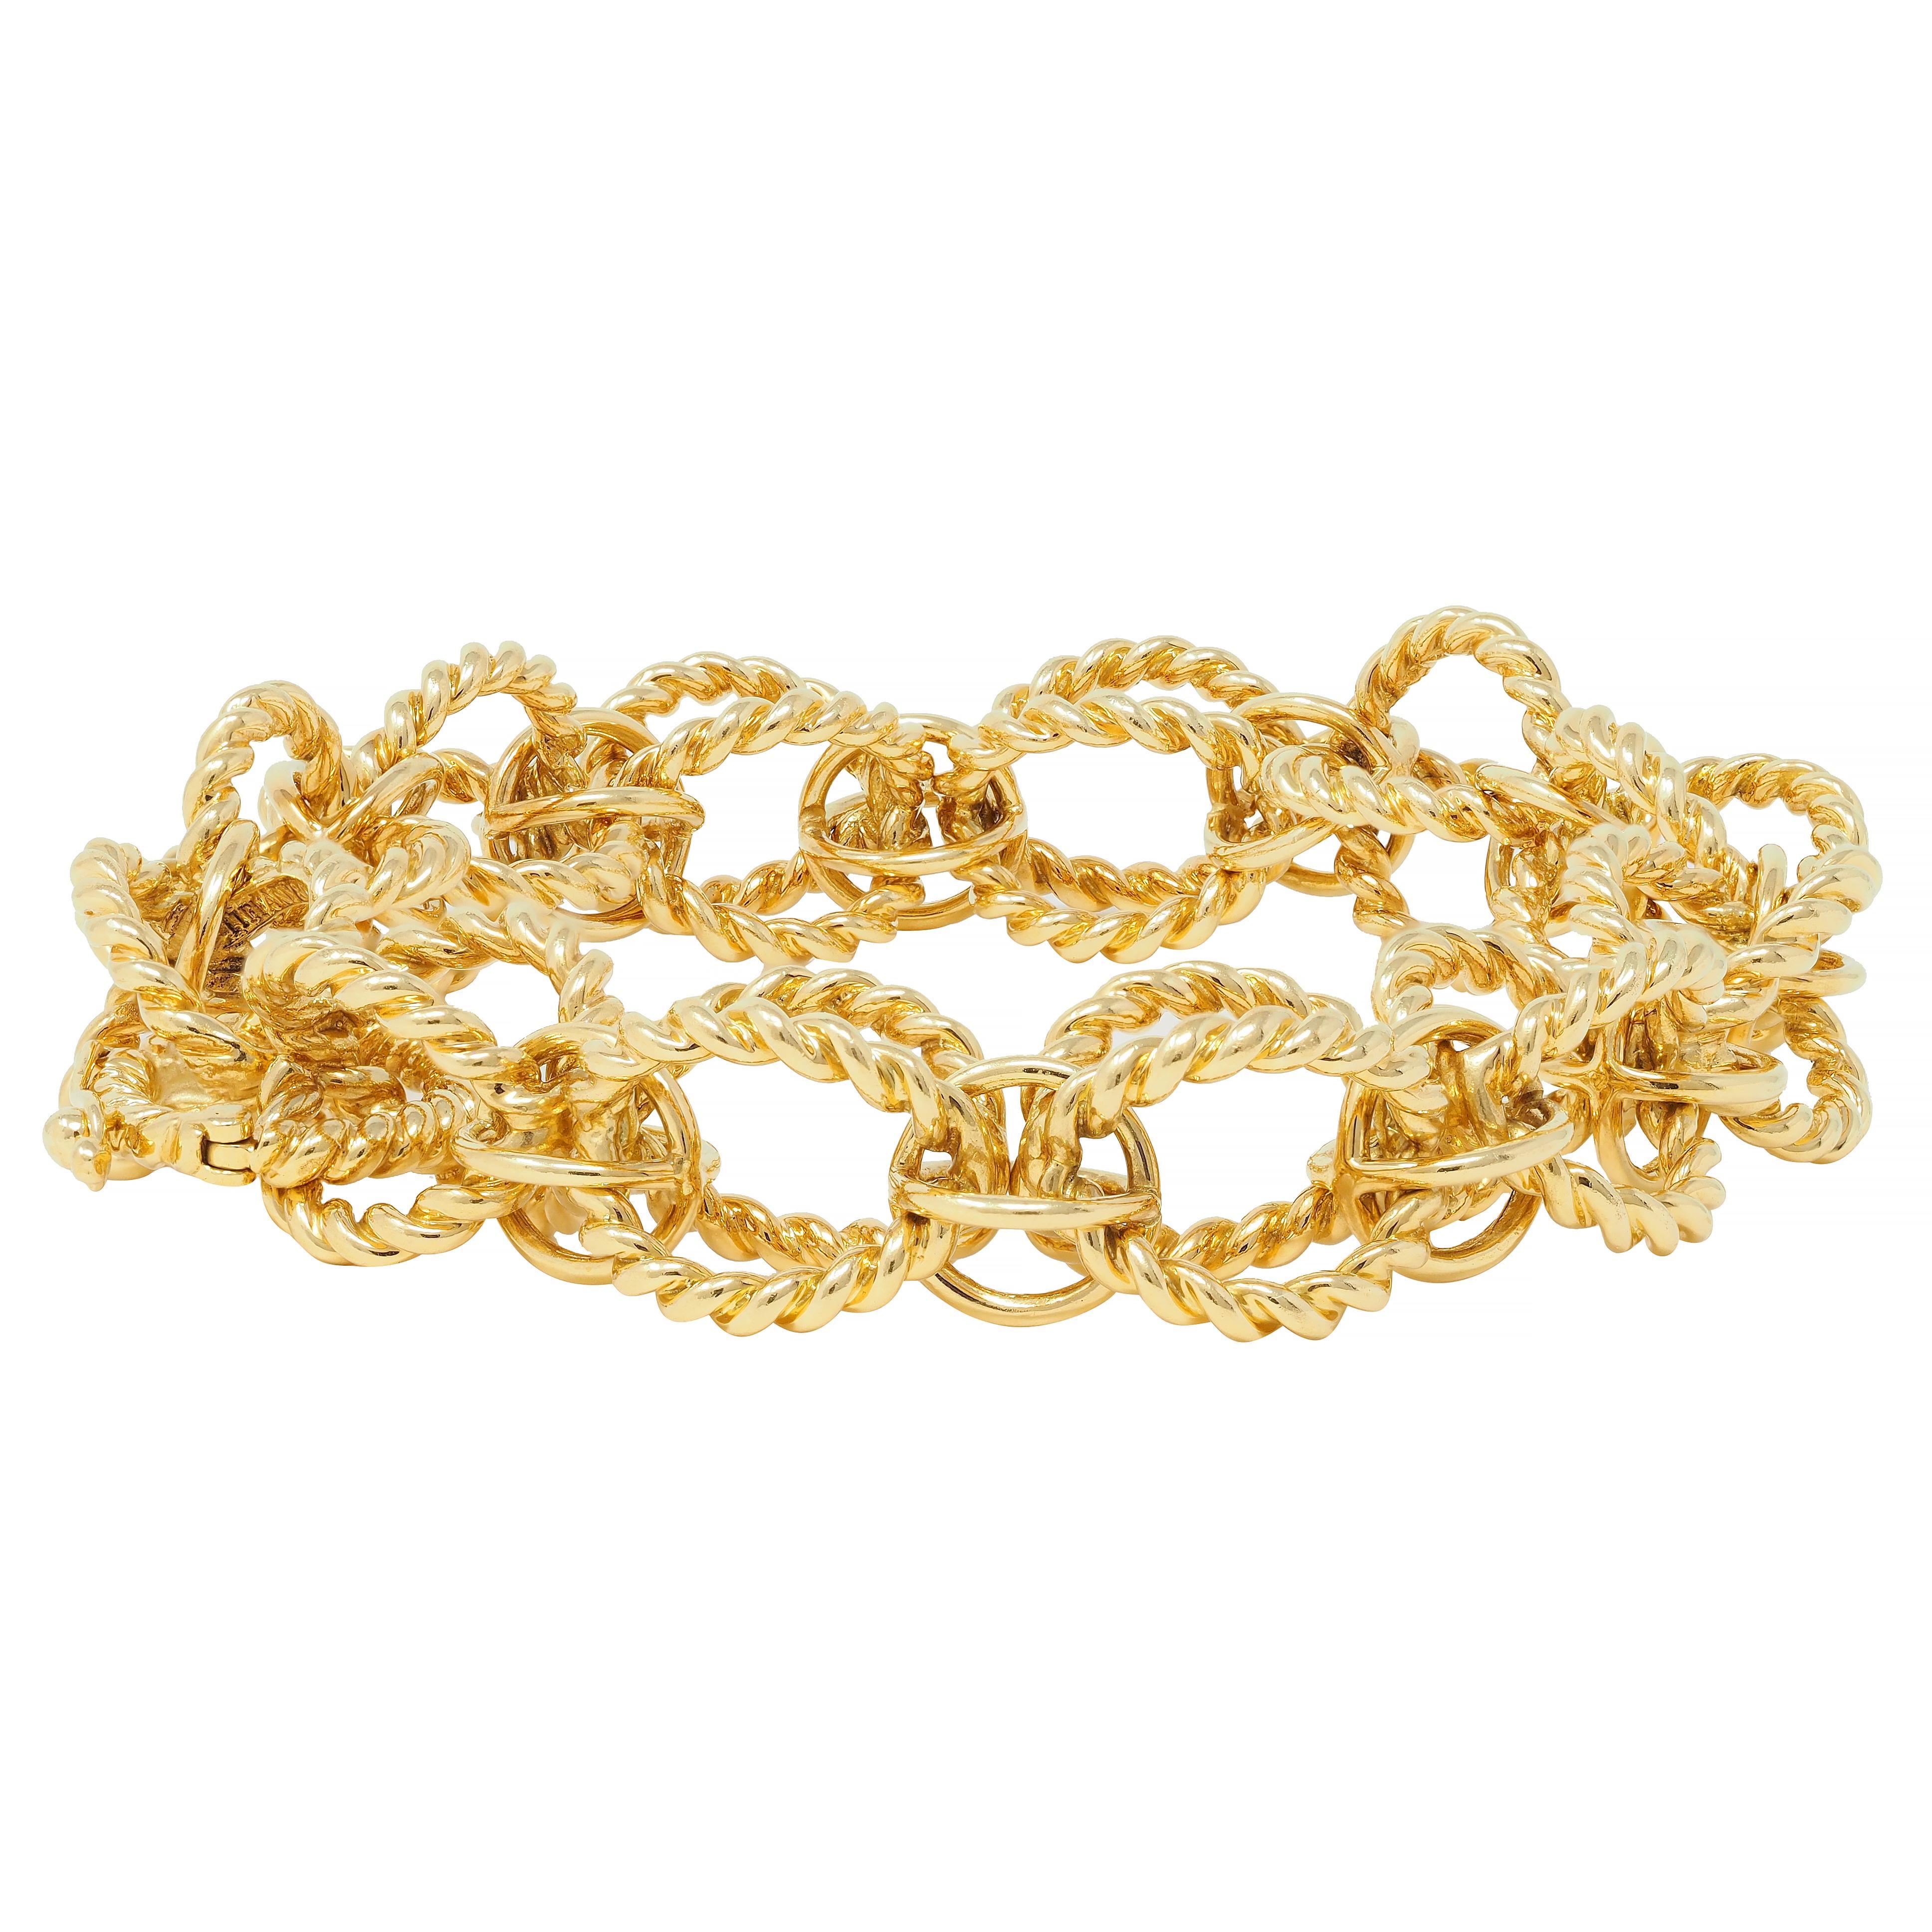 Comprised of dimensional circle links alternating in size
Large links are comprised of twisted rope motif 
Small links are smooth 
With high polish finish 
Completed by concealed clasp closure with hinged safety 
Stamped for 18 karat gold 
Fully